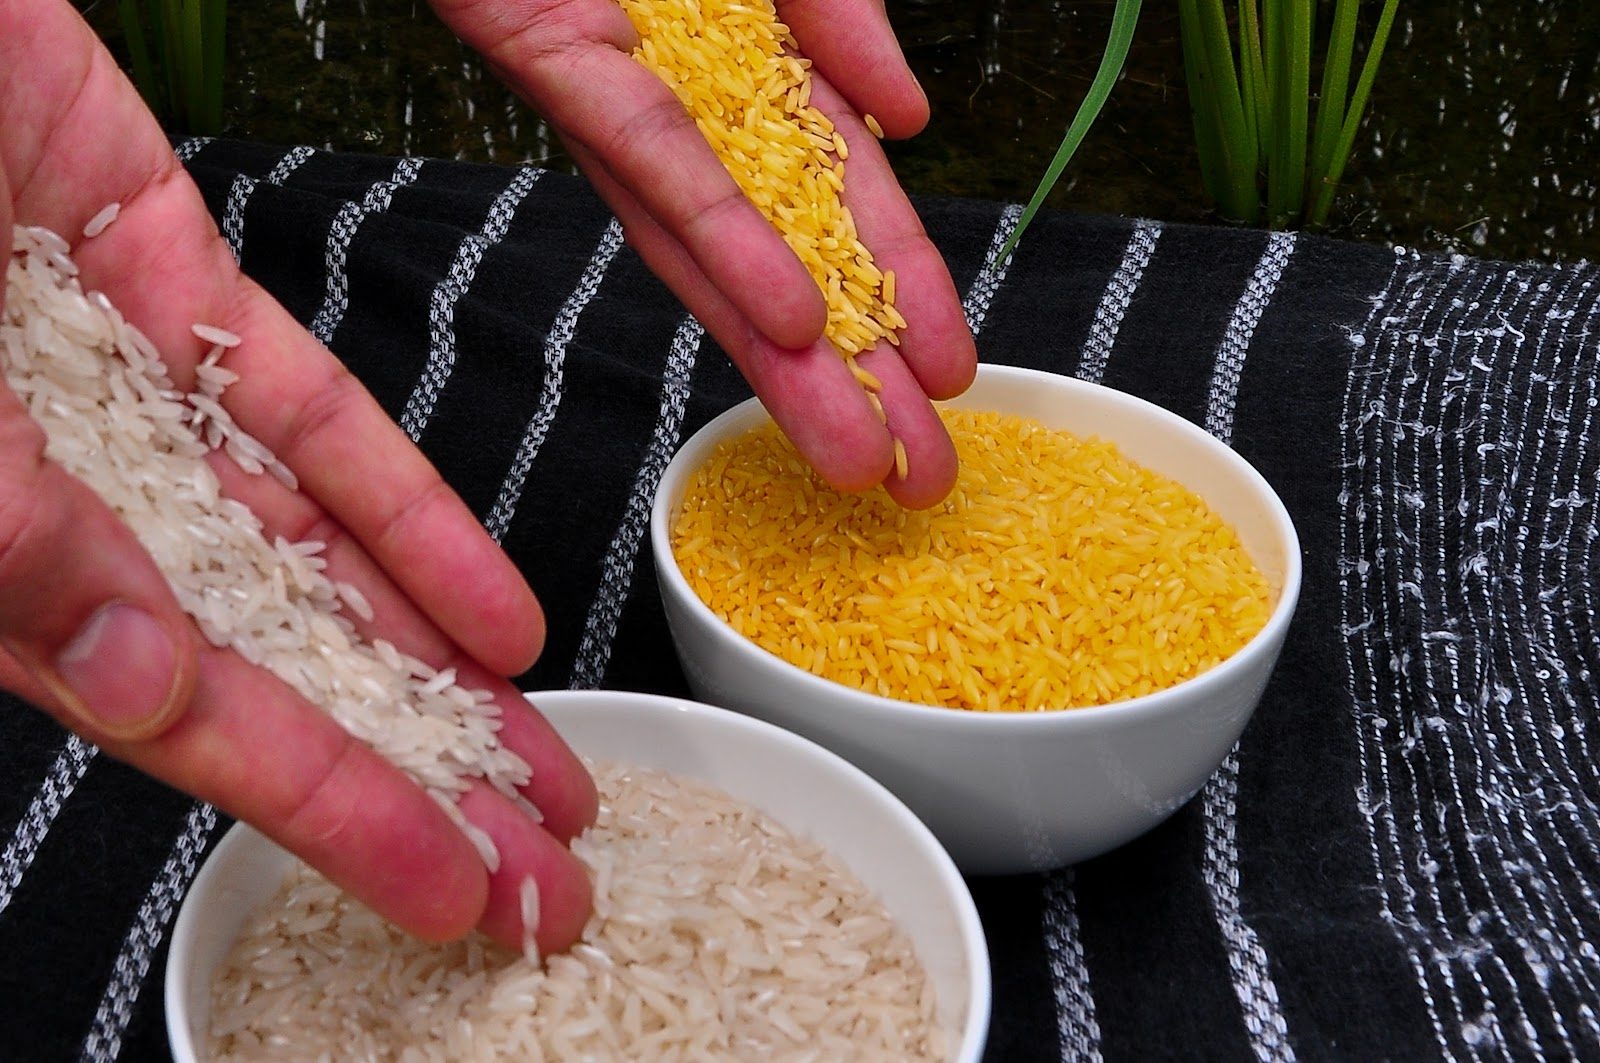 Philippines approves commercial use of genetically engineered rice